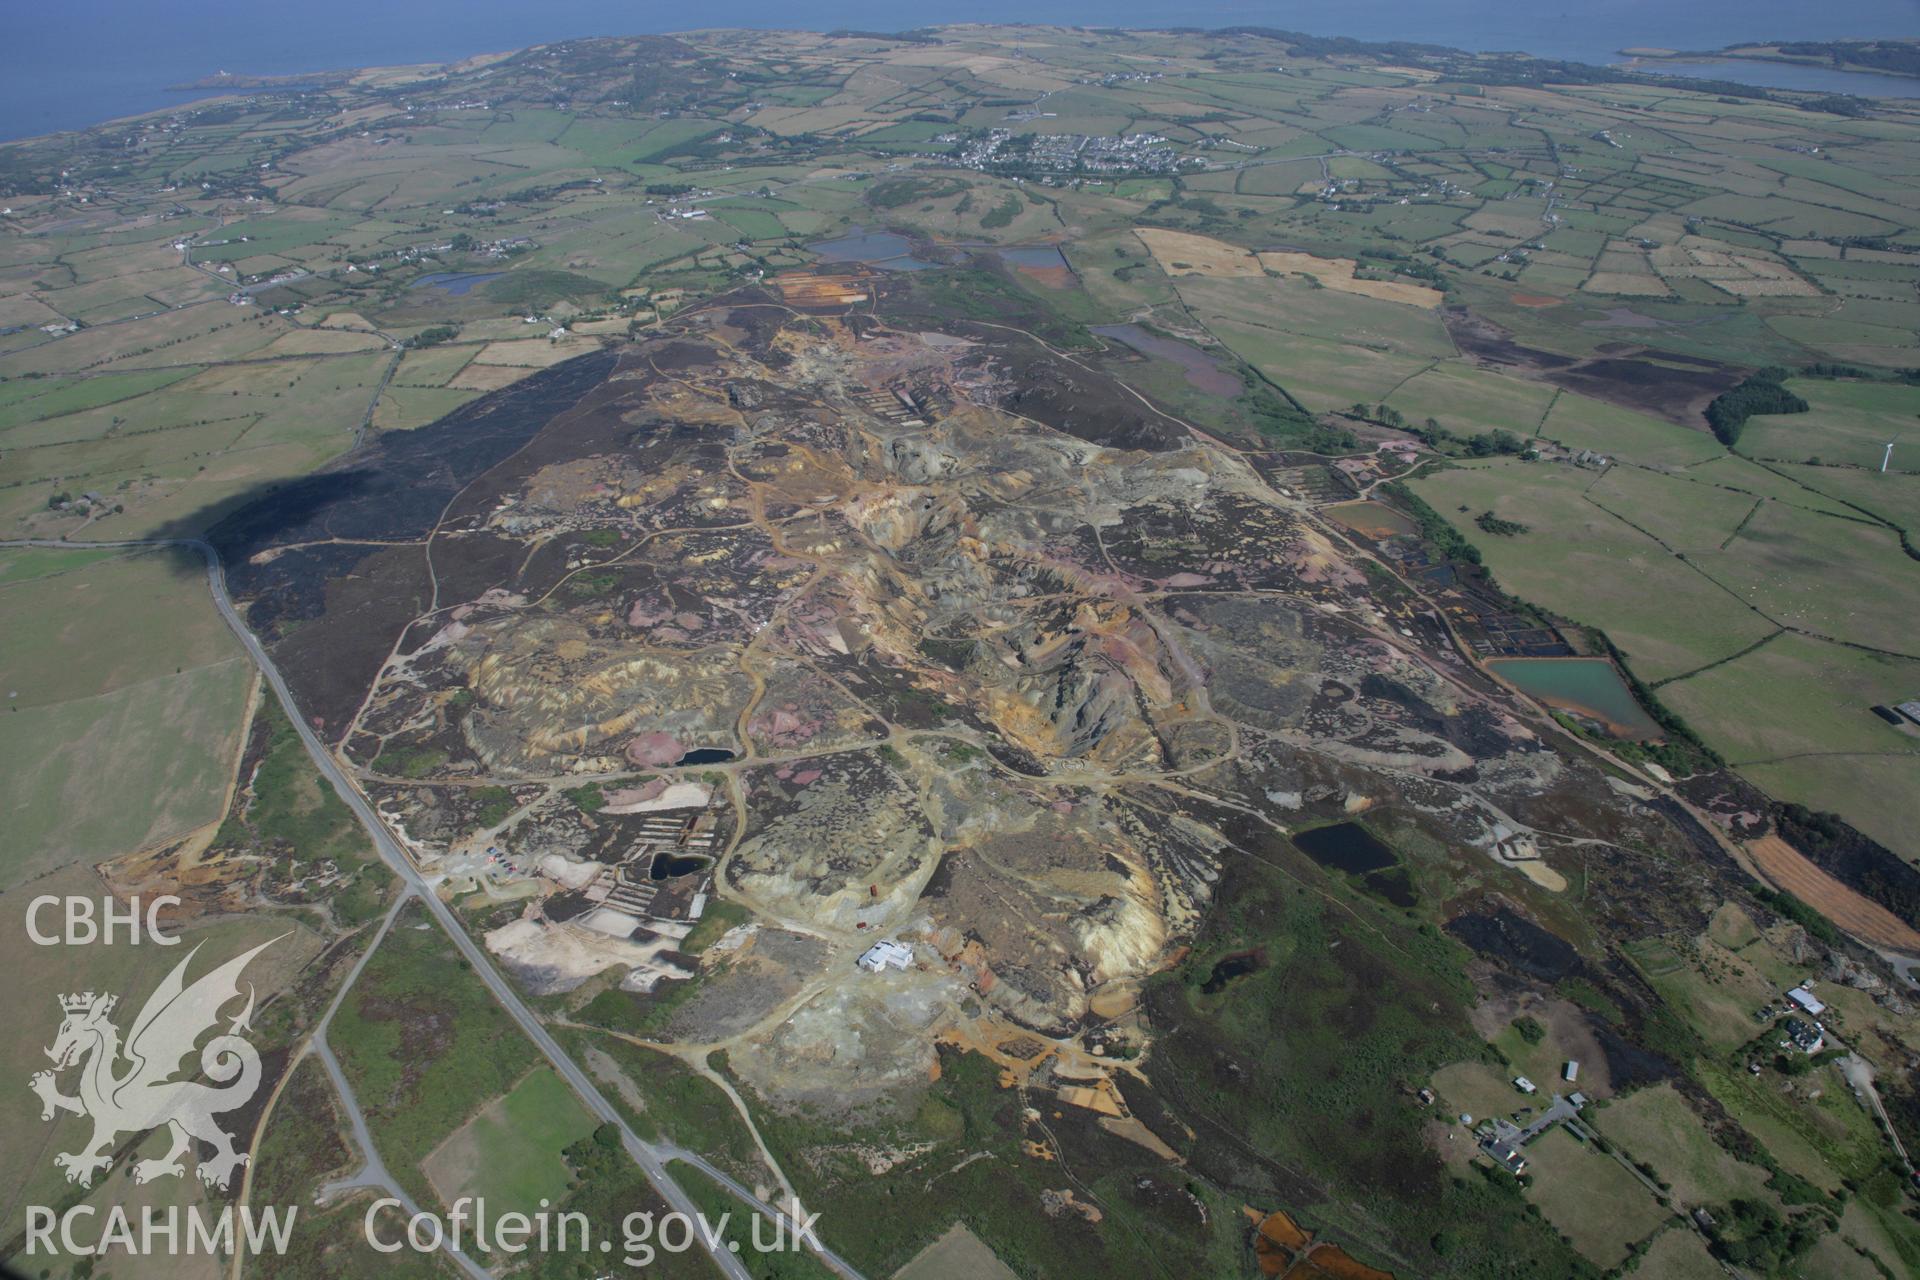 RCAHMW colour oblique aerial photograph of Parys Mountain Copper Mines, Amlwch. Taken on 14 August 2006 by Toby Driver.